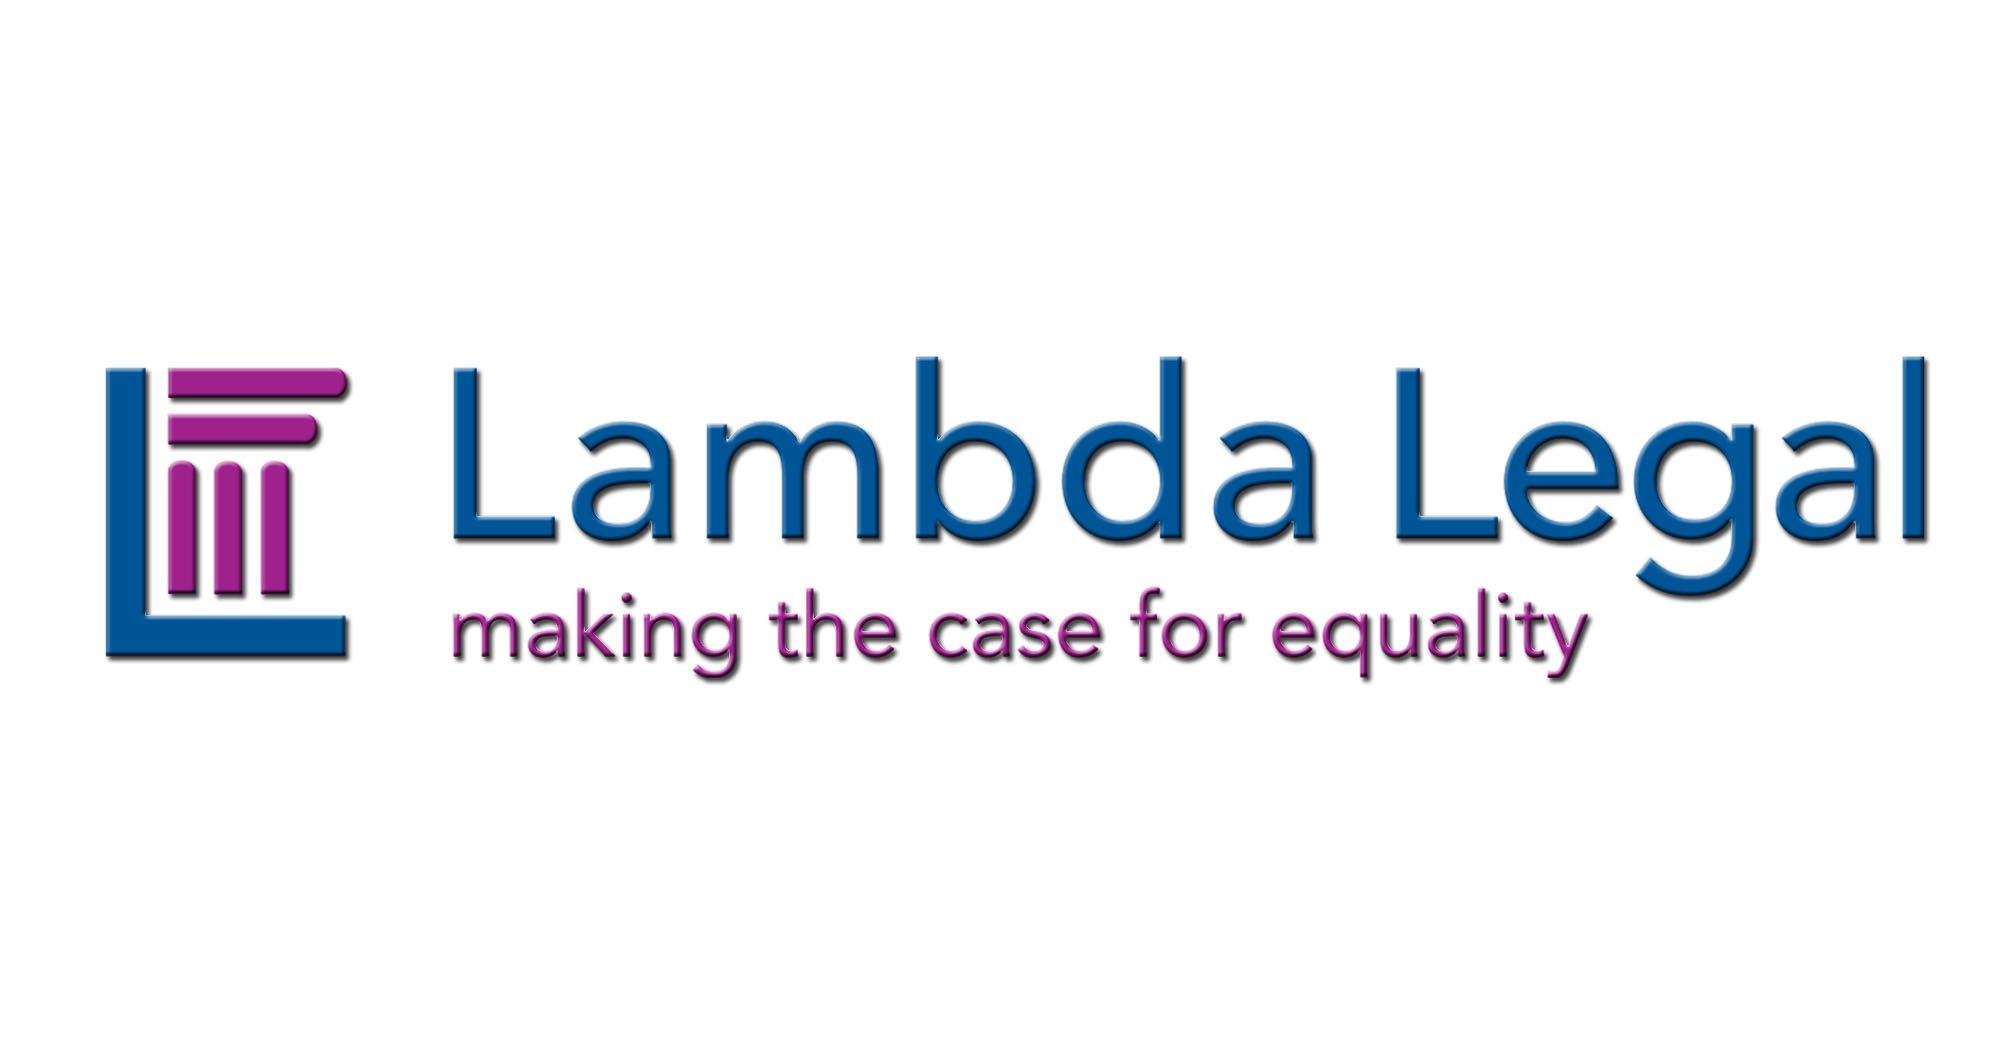   Lambda Legal    Lambda Legal works to impact litigation, provide public policy advocacy, and to educate and communicate about and with the LGBTQ+ community. Lambda Legal provides state specific rights and tool kits, and also offers free legal help.